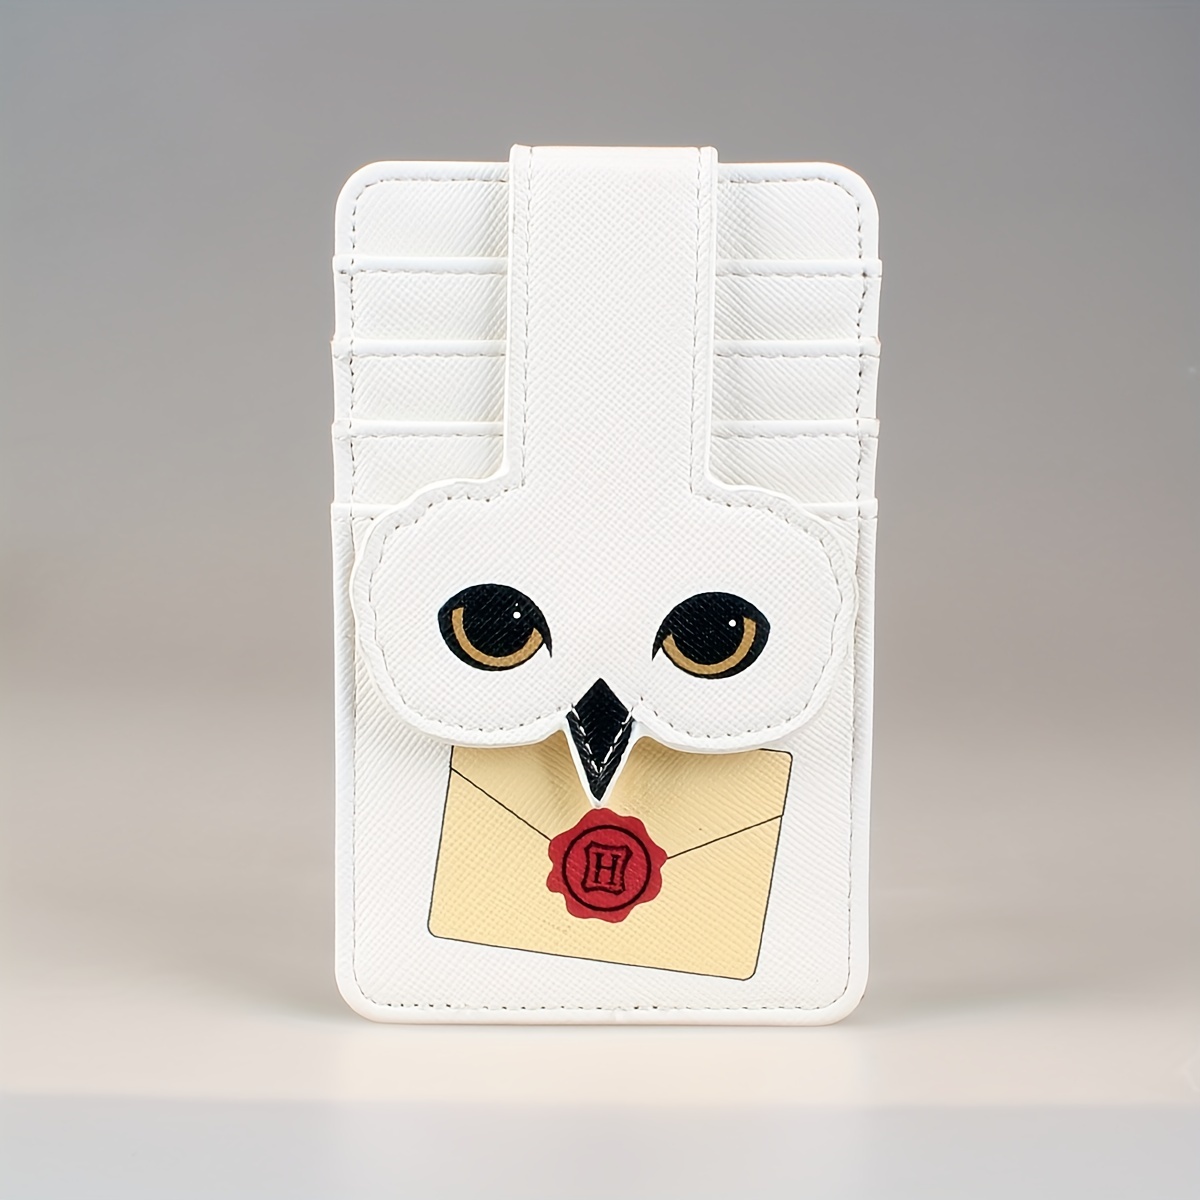 1pc Fashionable Owl Shaped Coin Purse Keychain, Trendy Personality Keyring  Pendant